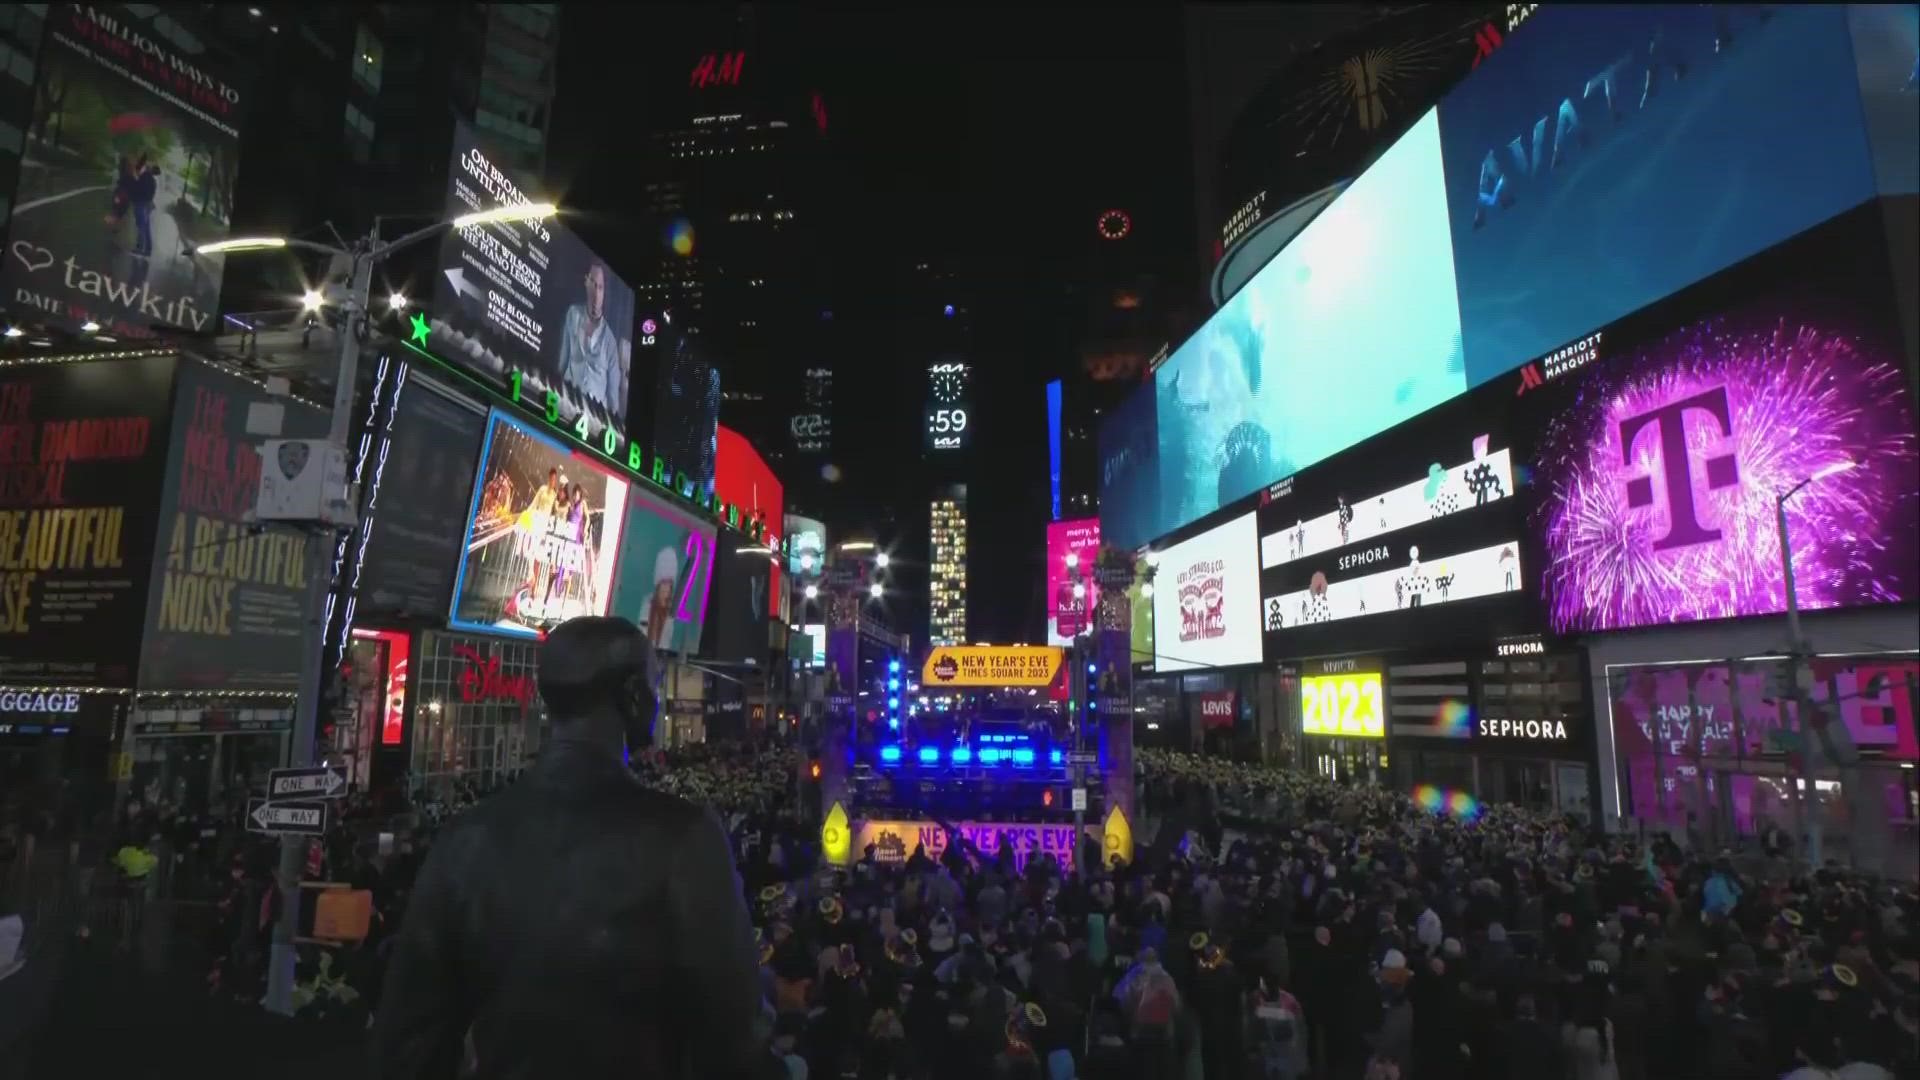 The annual tradition was back in full force as hundreds of thousands rang in the New Year in New York City's Times Square.